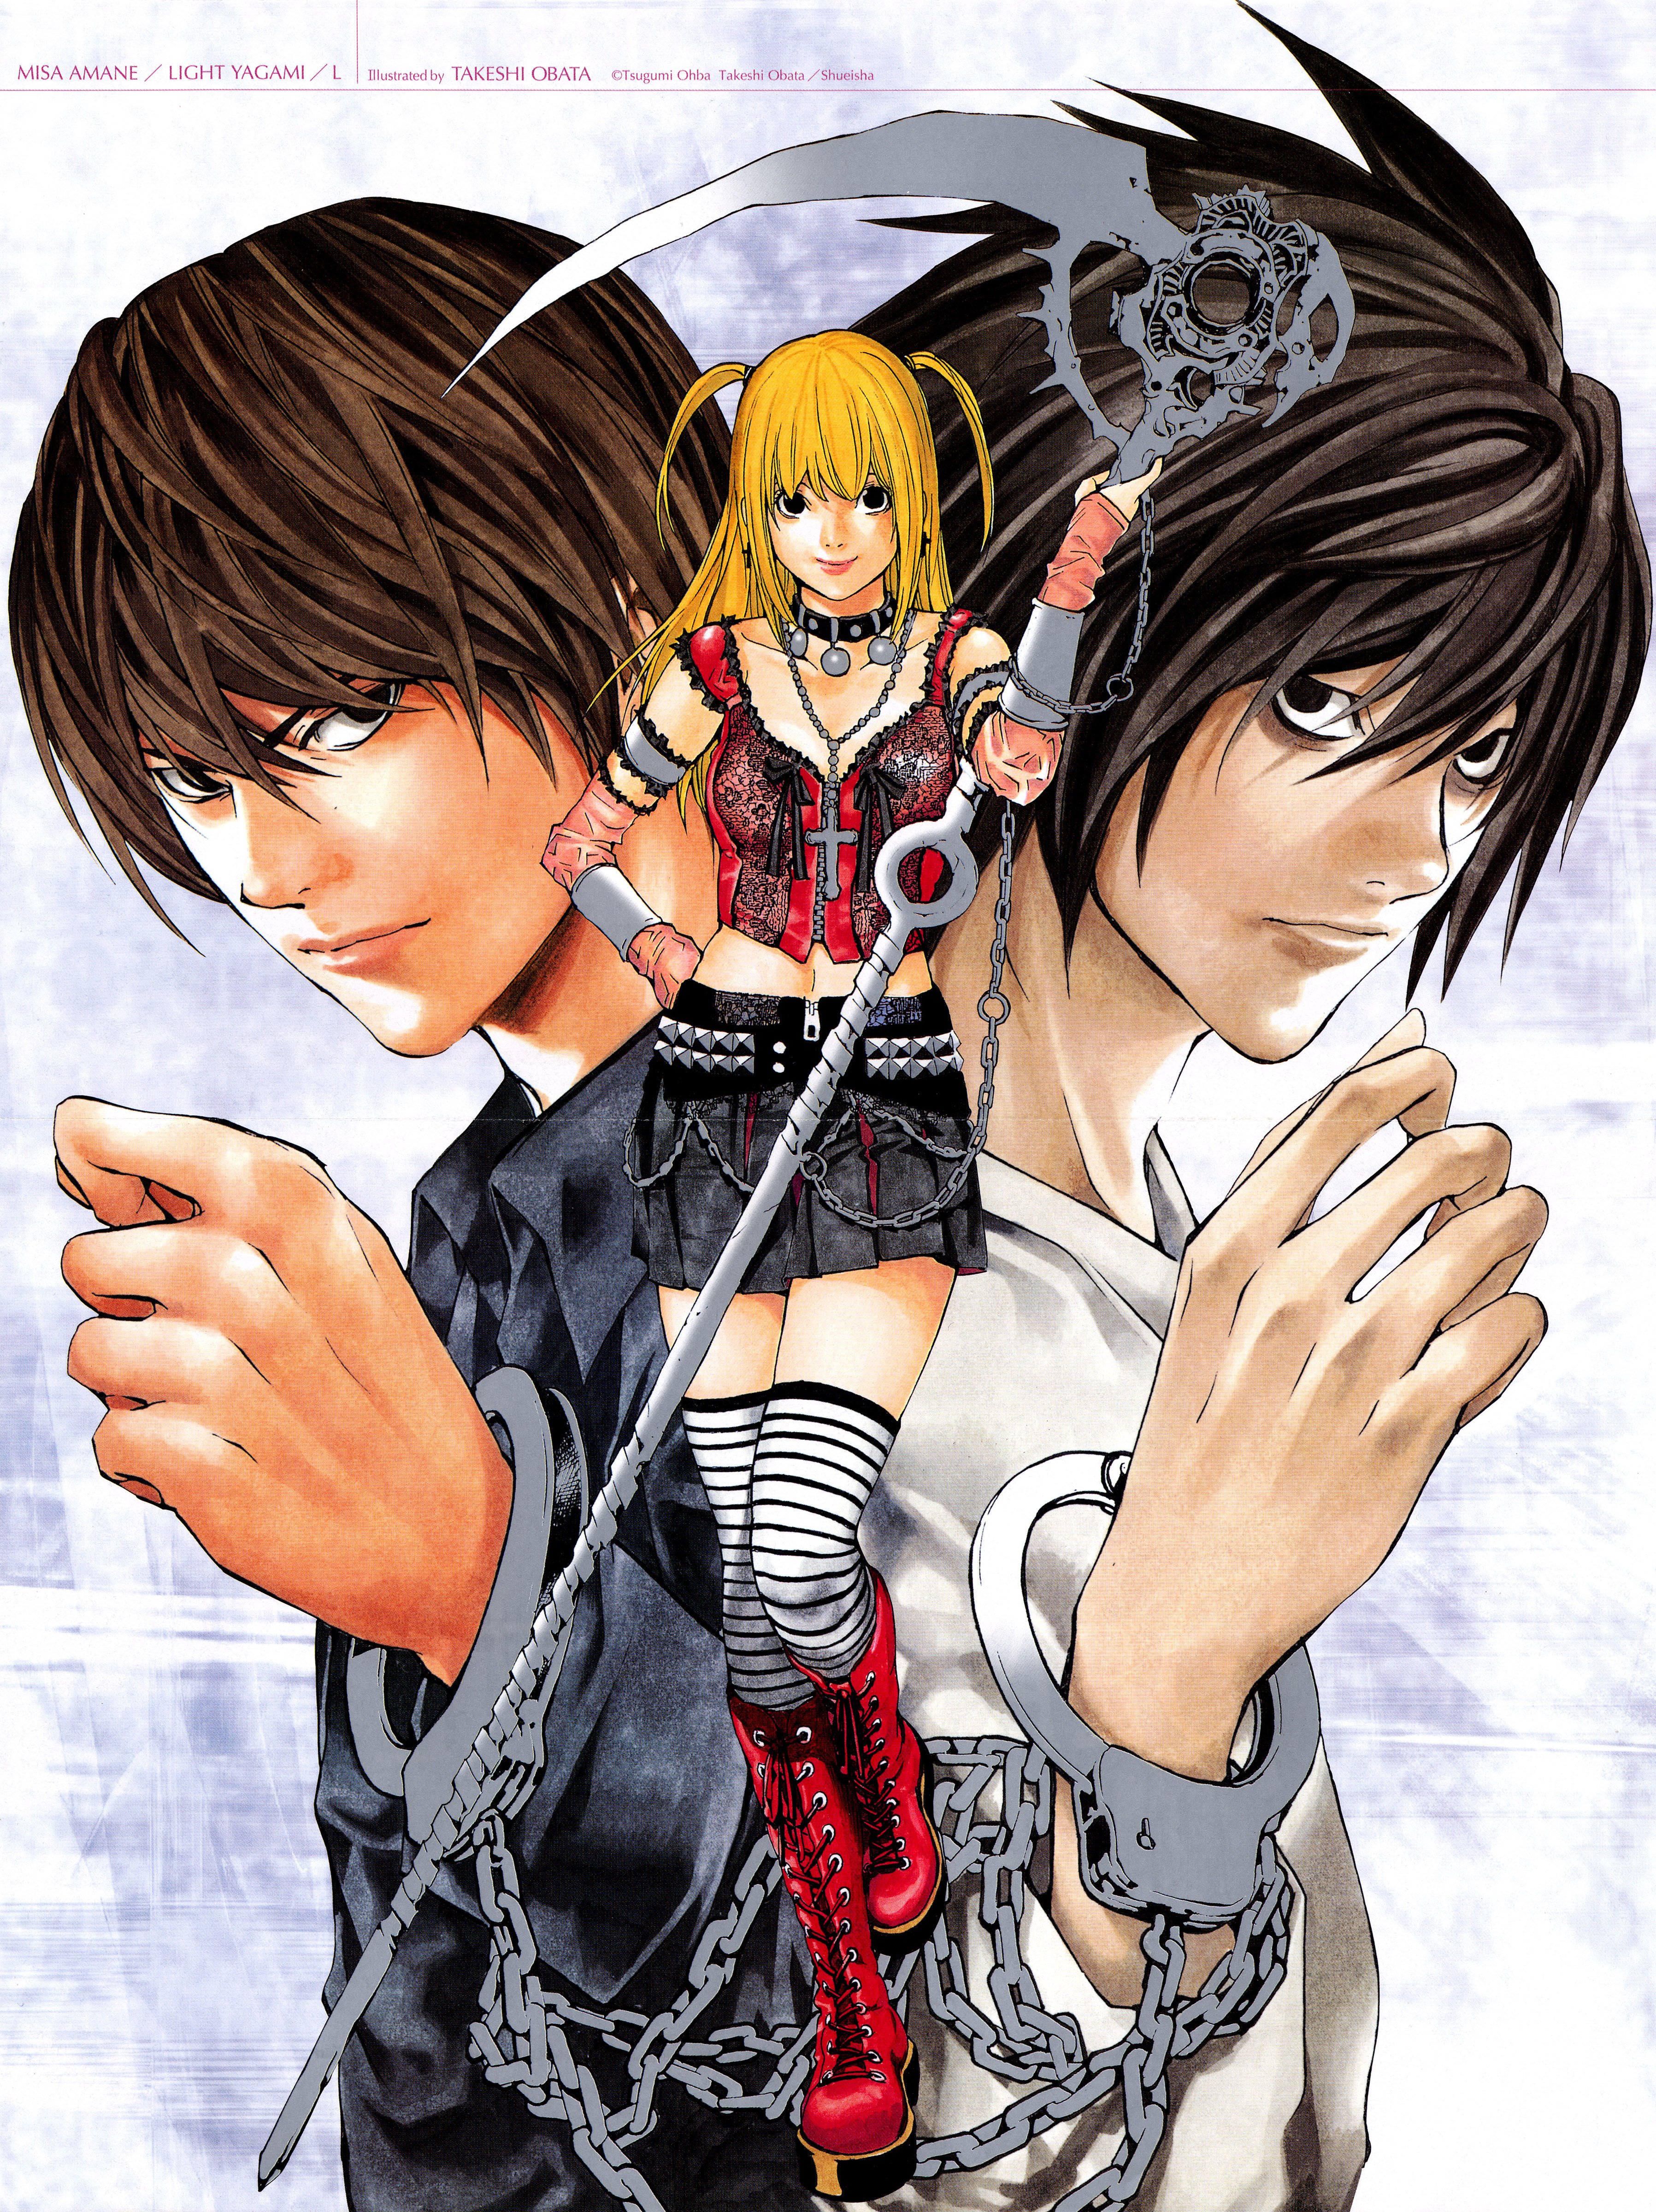 death, Note, Series, Light, Yagami, Anime, Groupl, Girl, Guy, Misa, Amane, Character Wallpaper